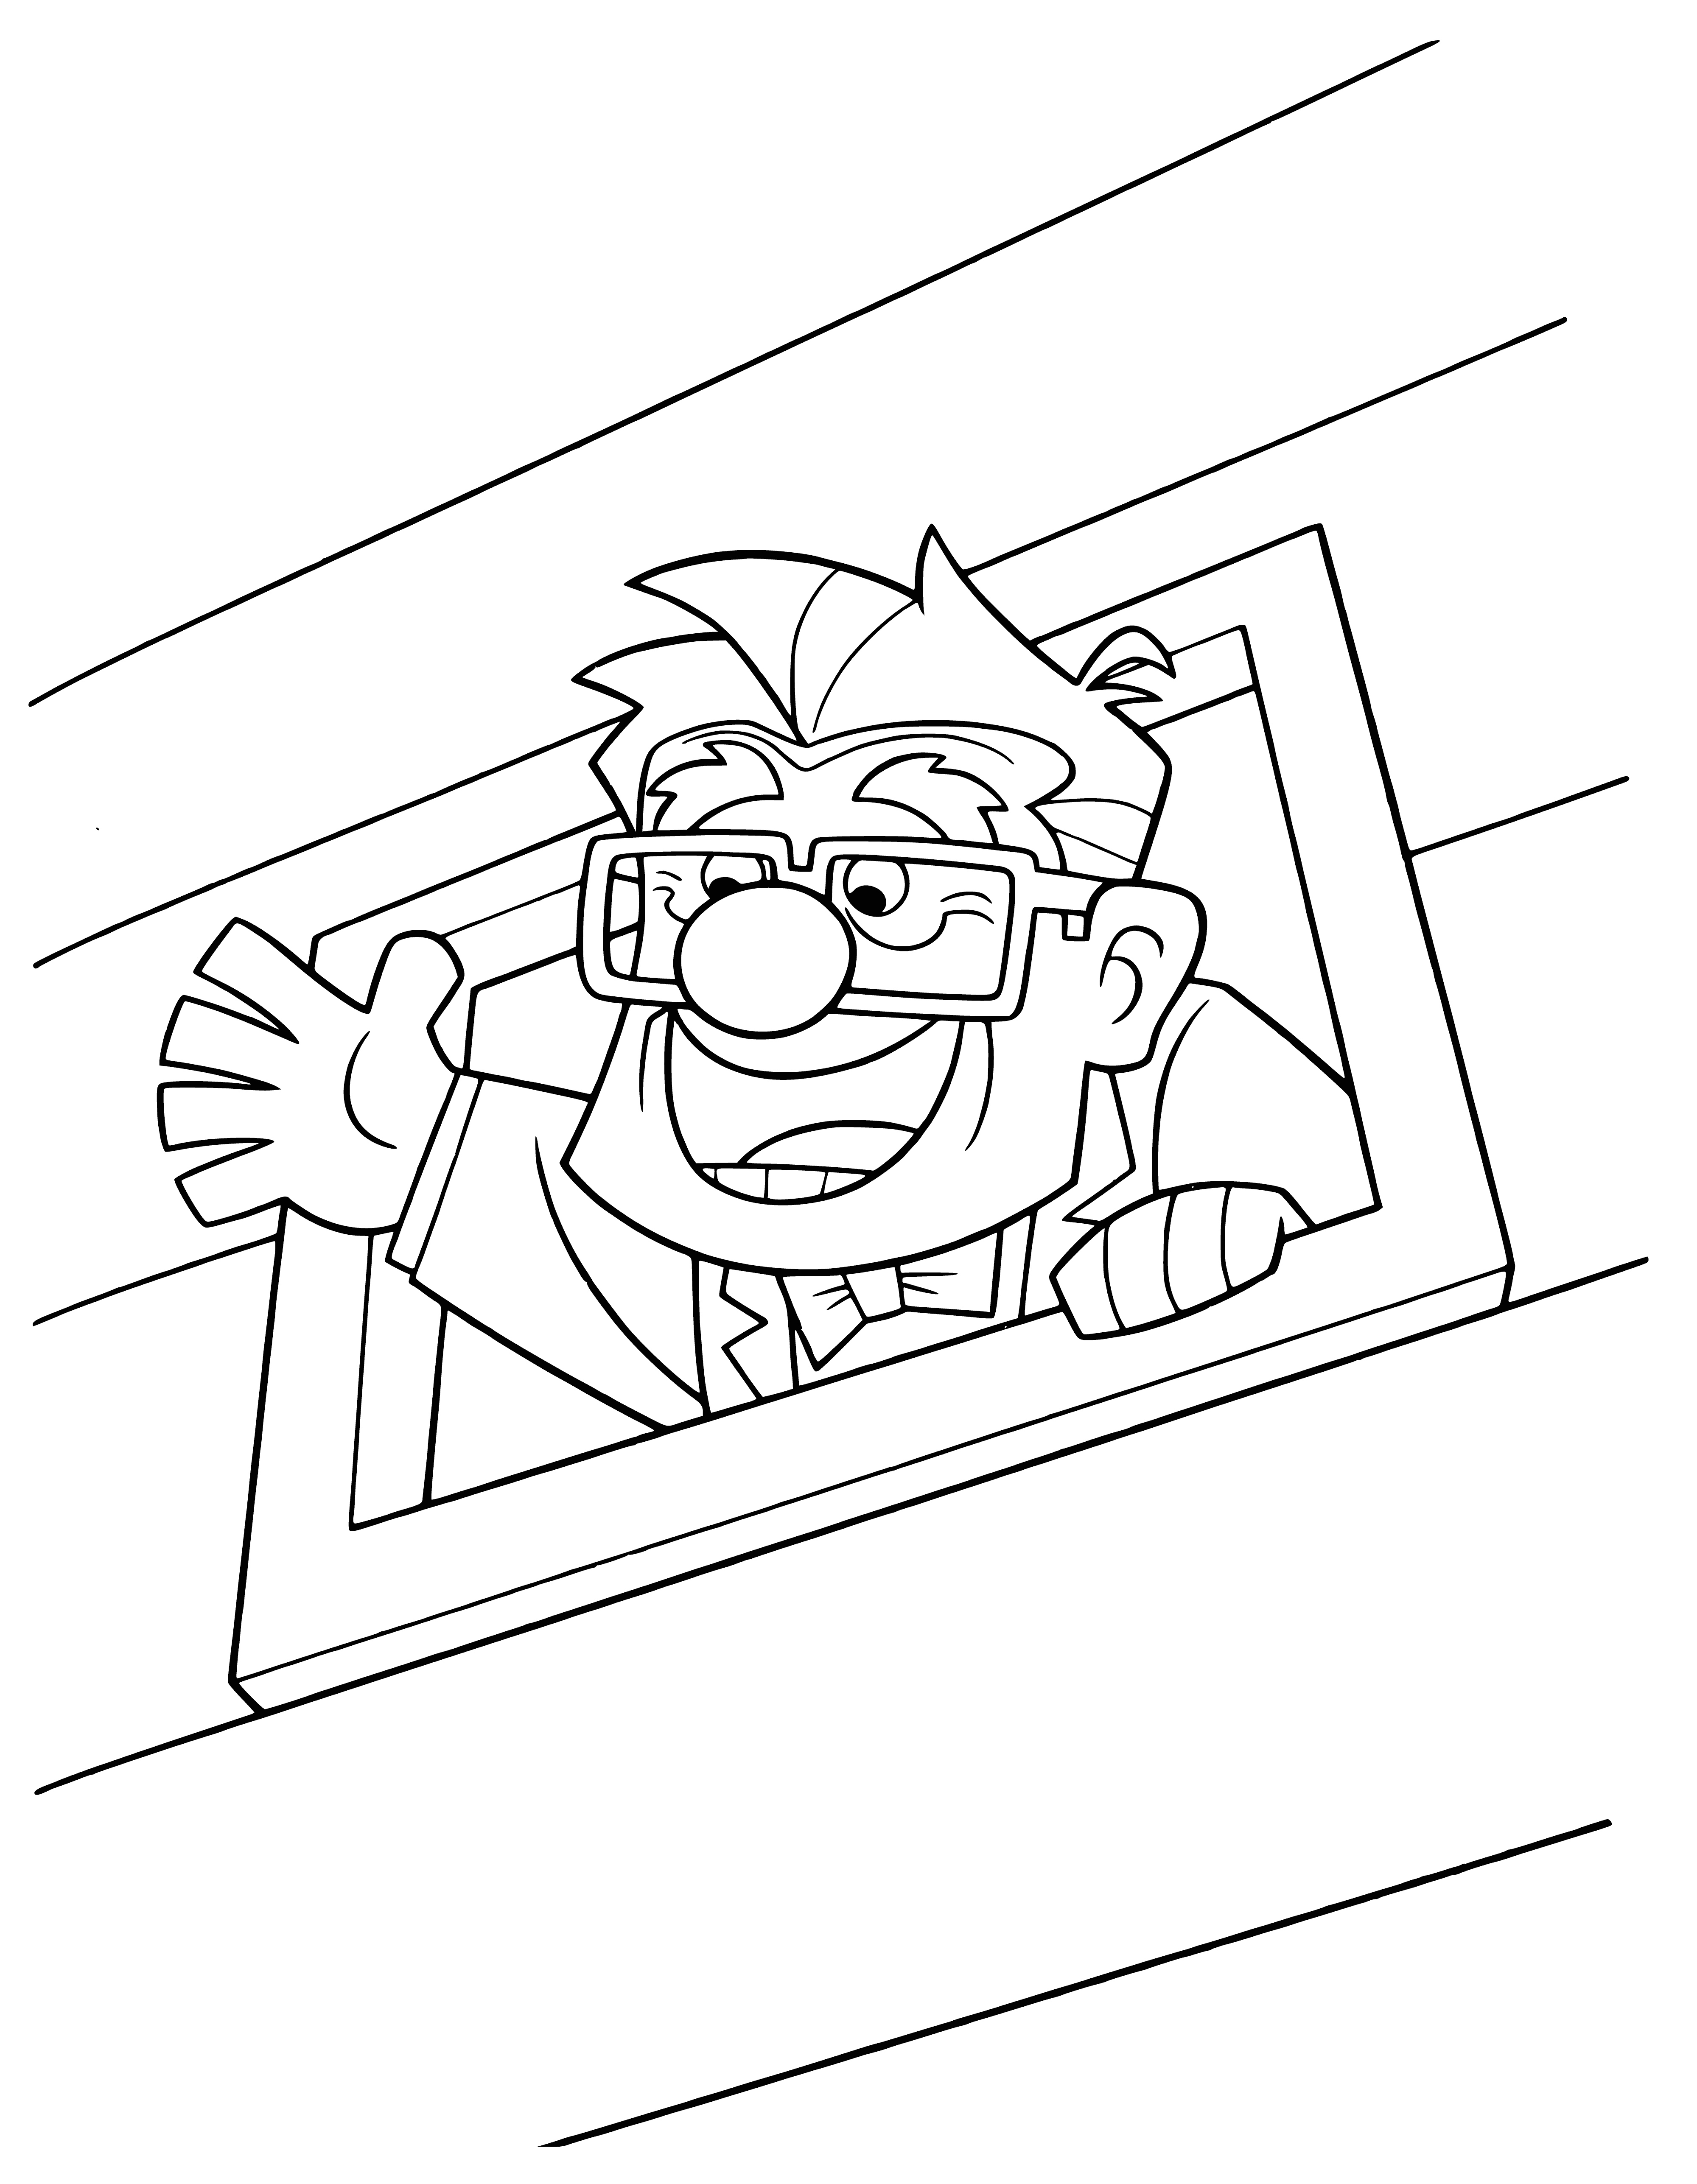 Carl pleased coloring page